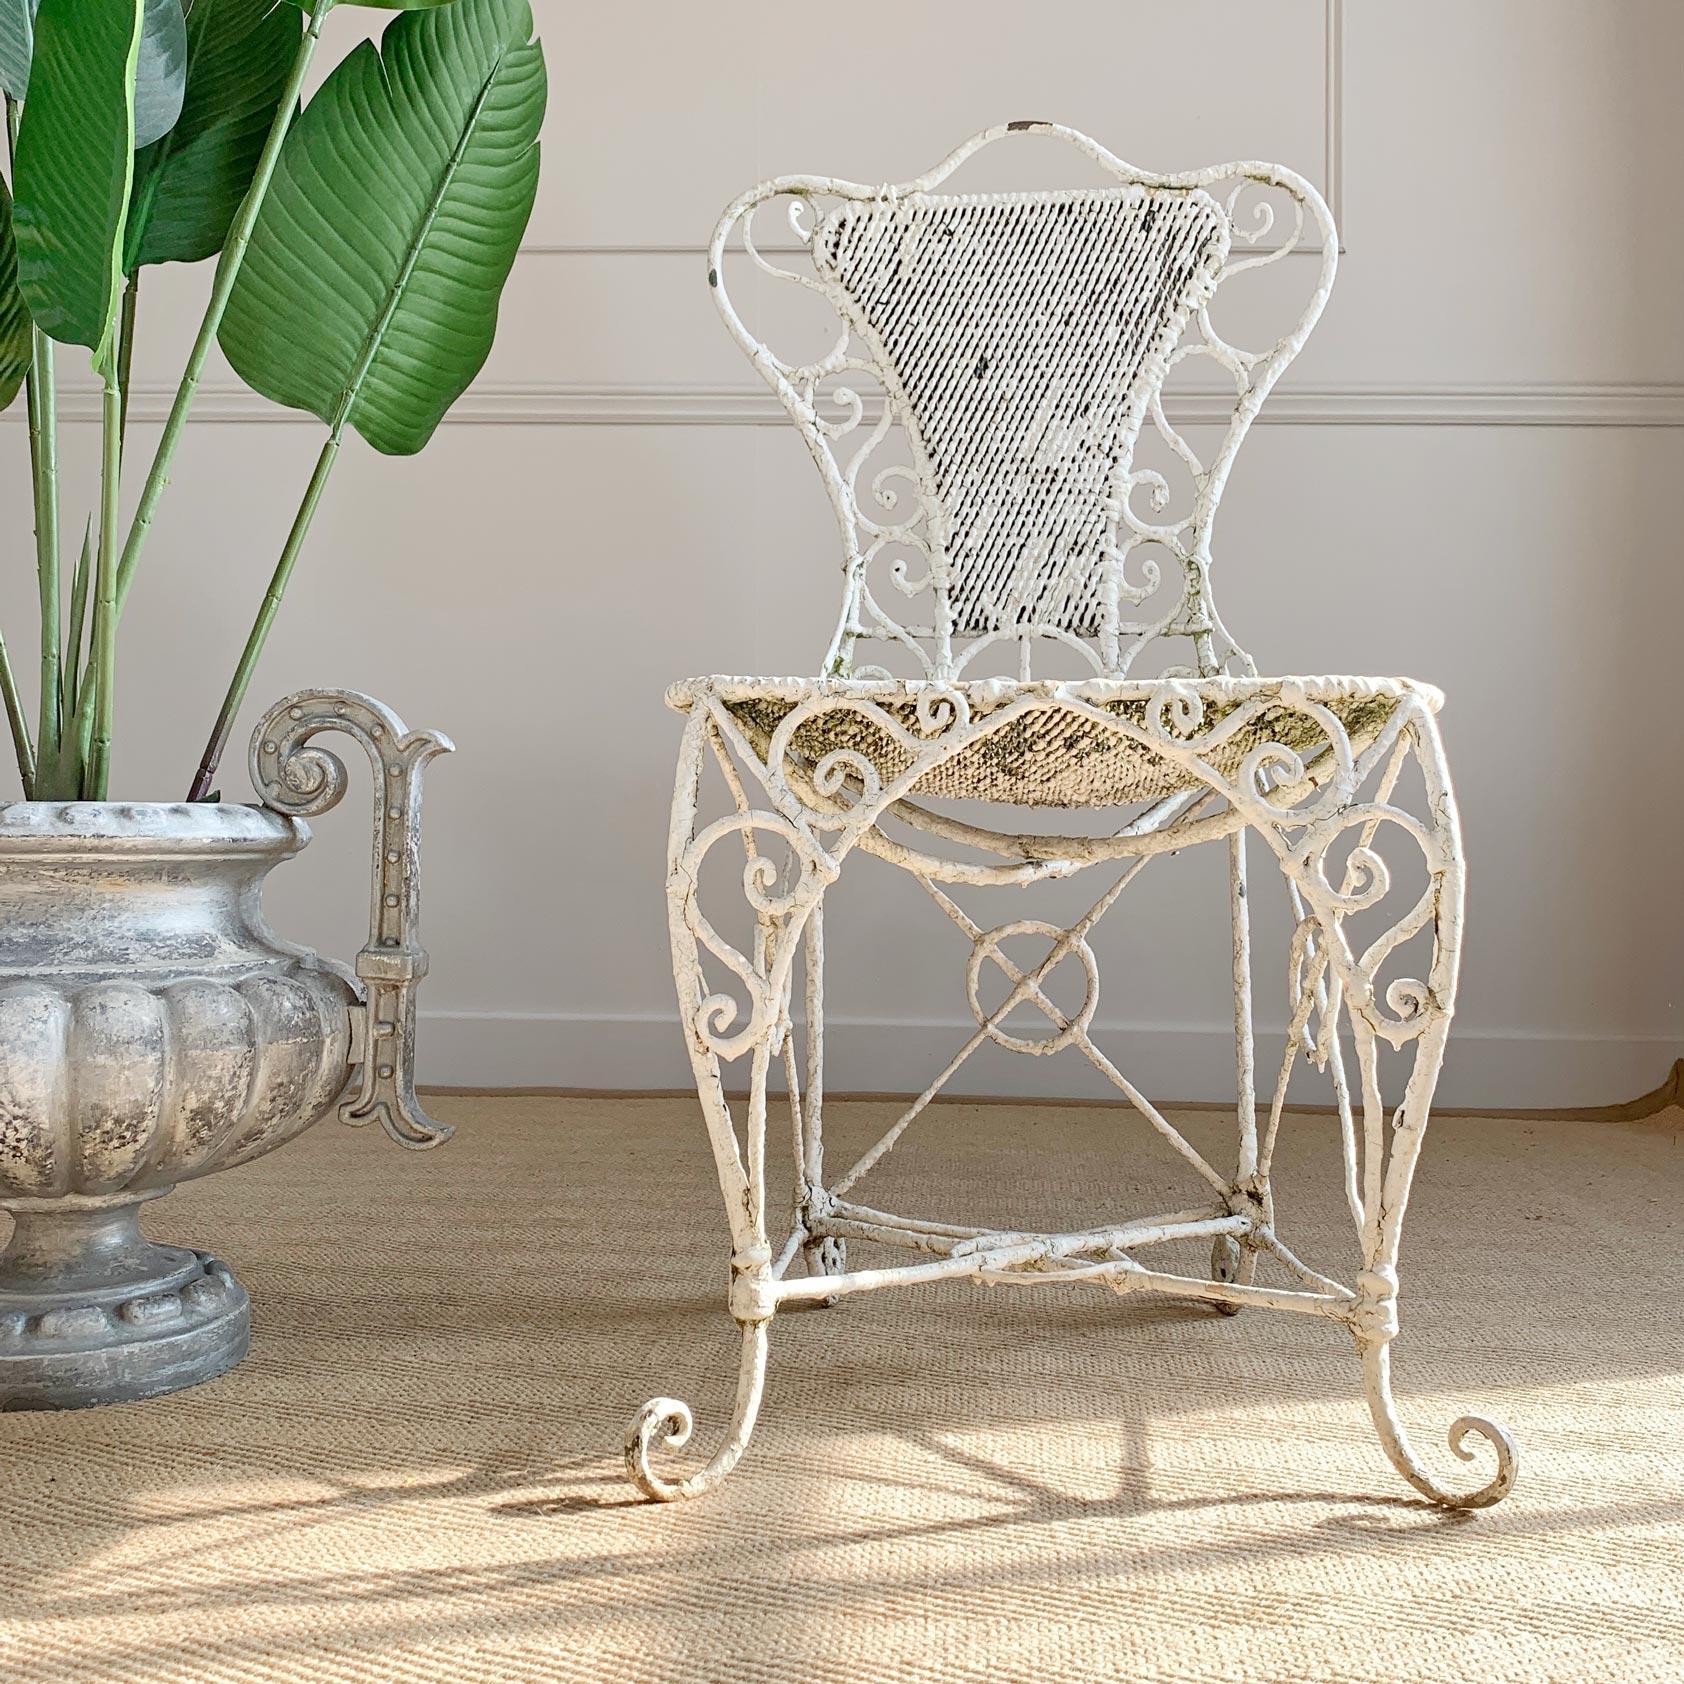 English Ornate Regency White Wirework Iron Chair For Sale